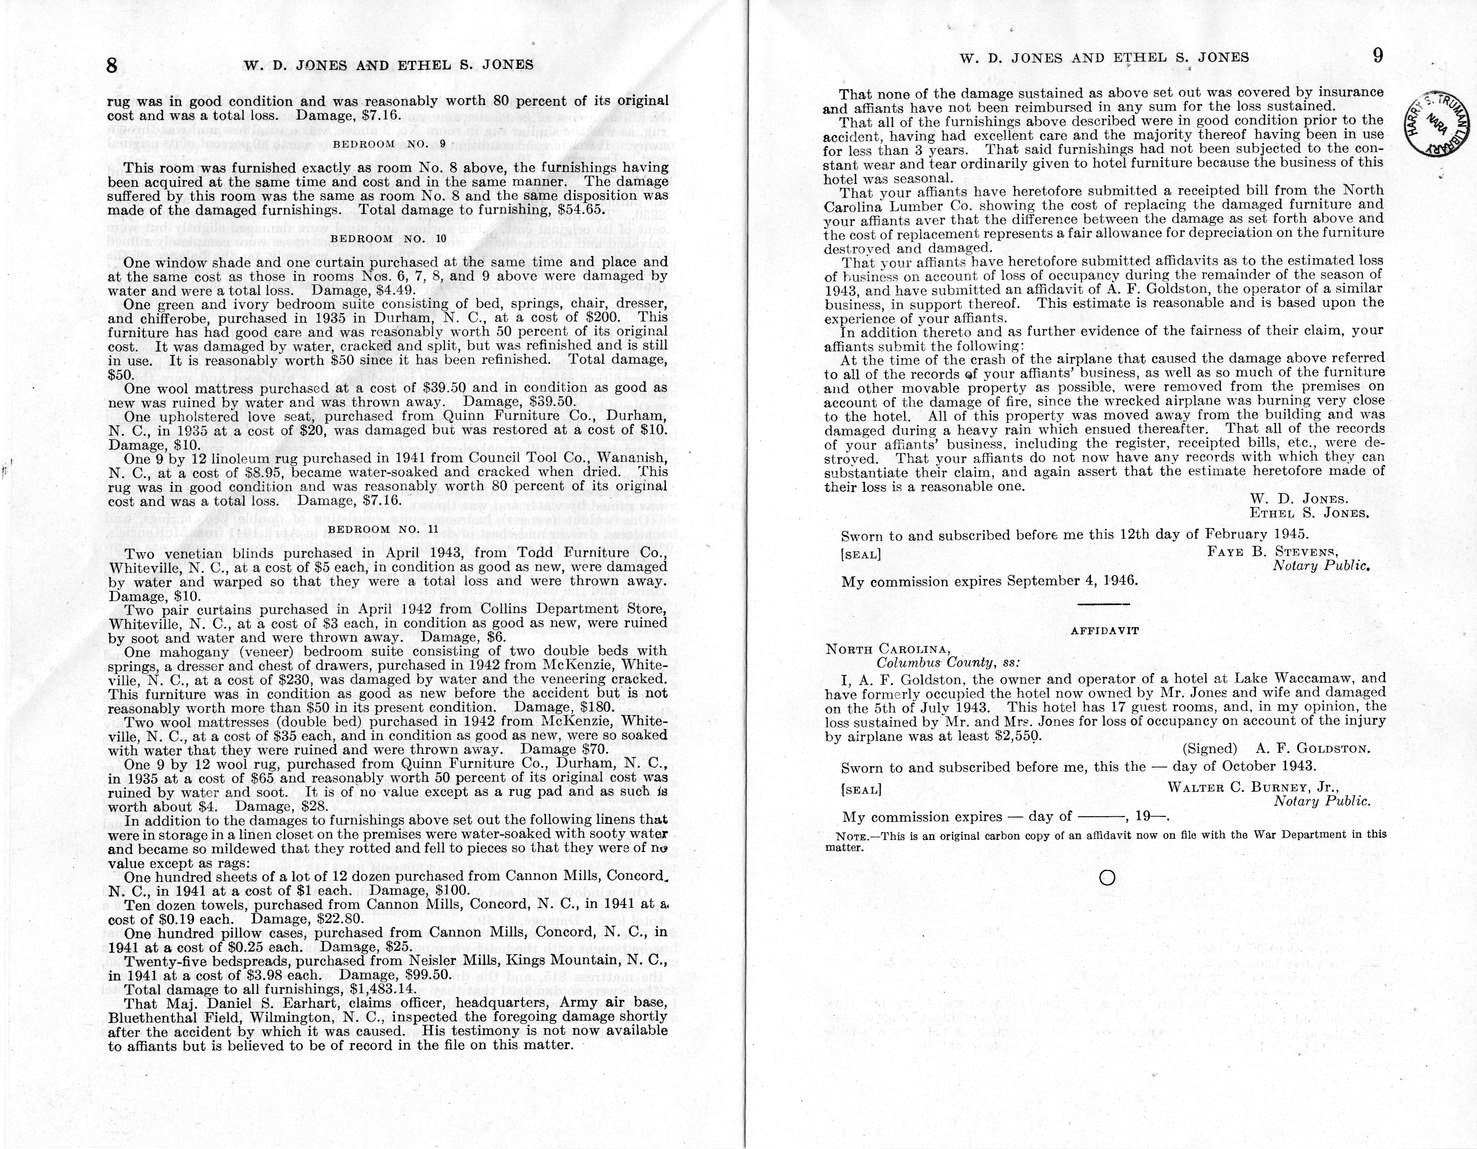 Memorandum from Frederick J. Bailey to M. C. Latta, H. R. 2661, For the Relief of W. D. Jones and Ethel S. Jones, with Attachments